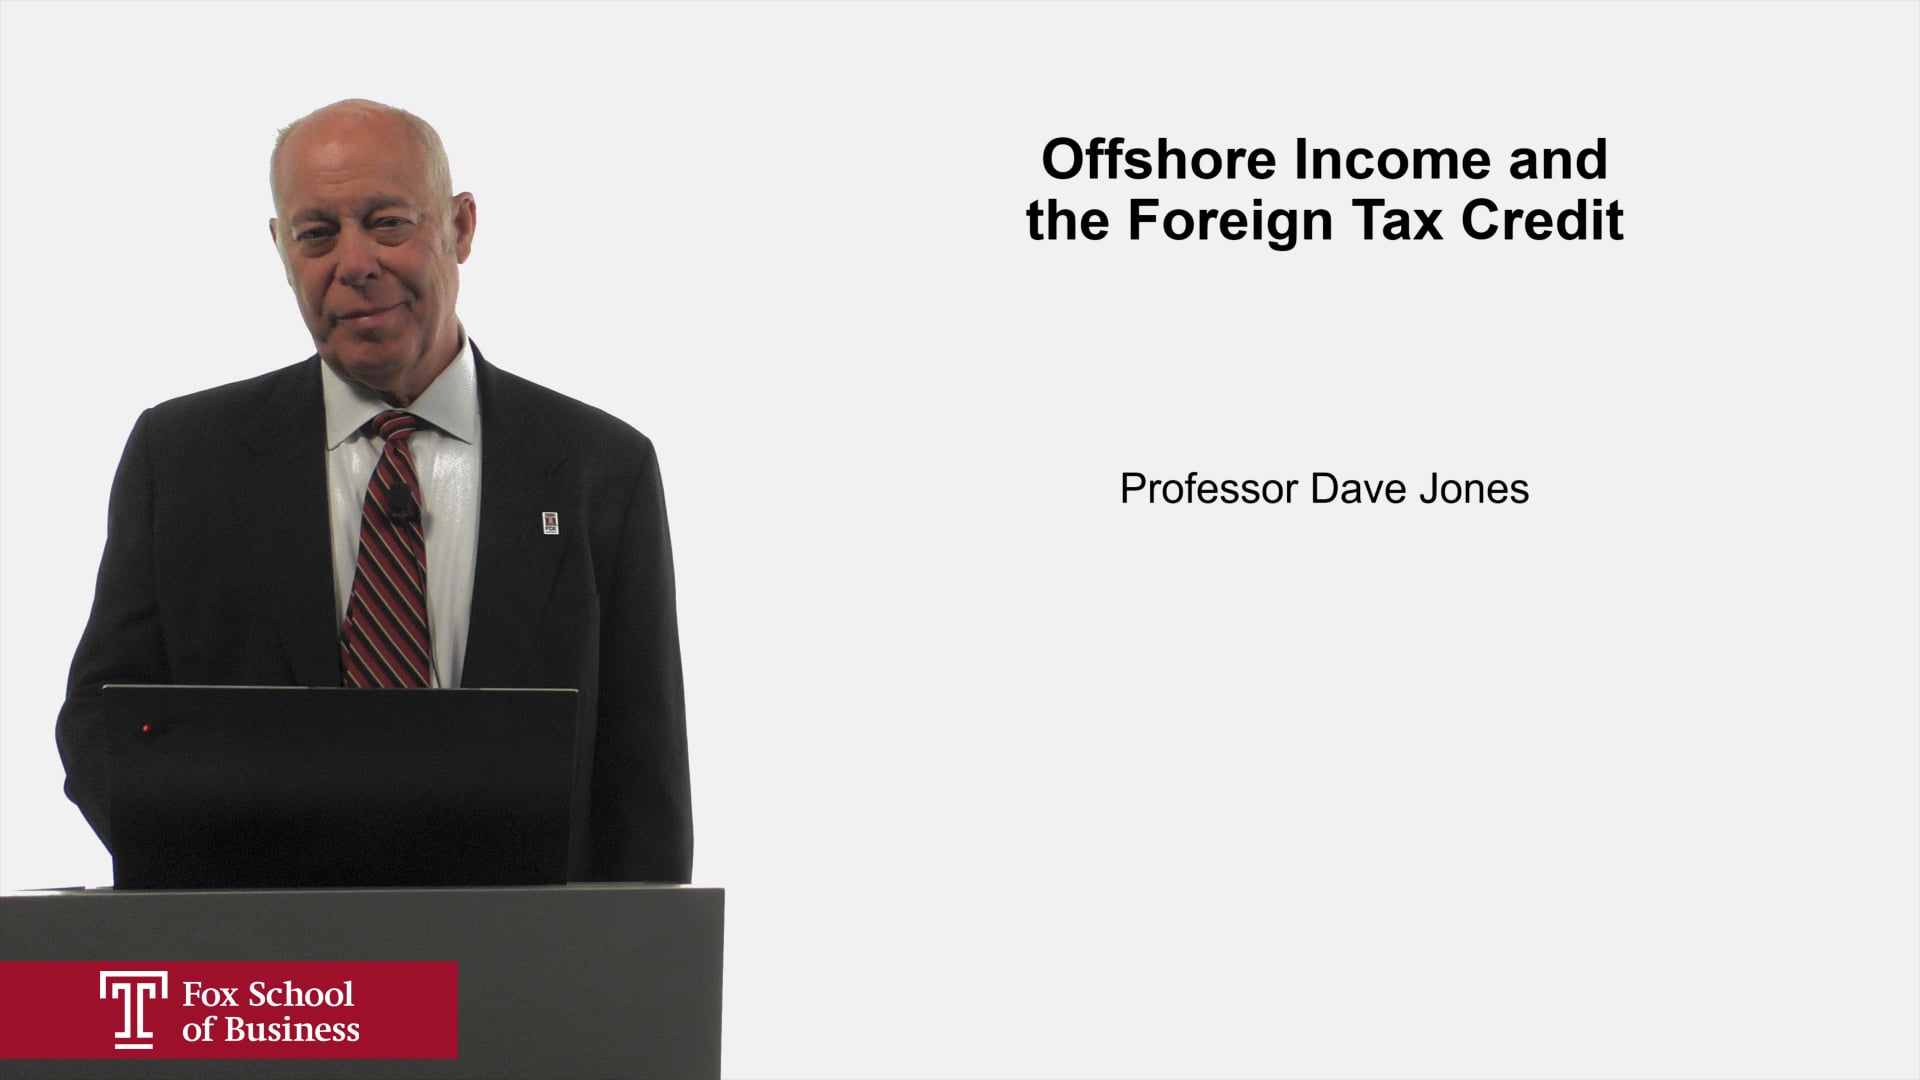 Offshore Income and Foreign Tax Credit